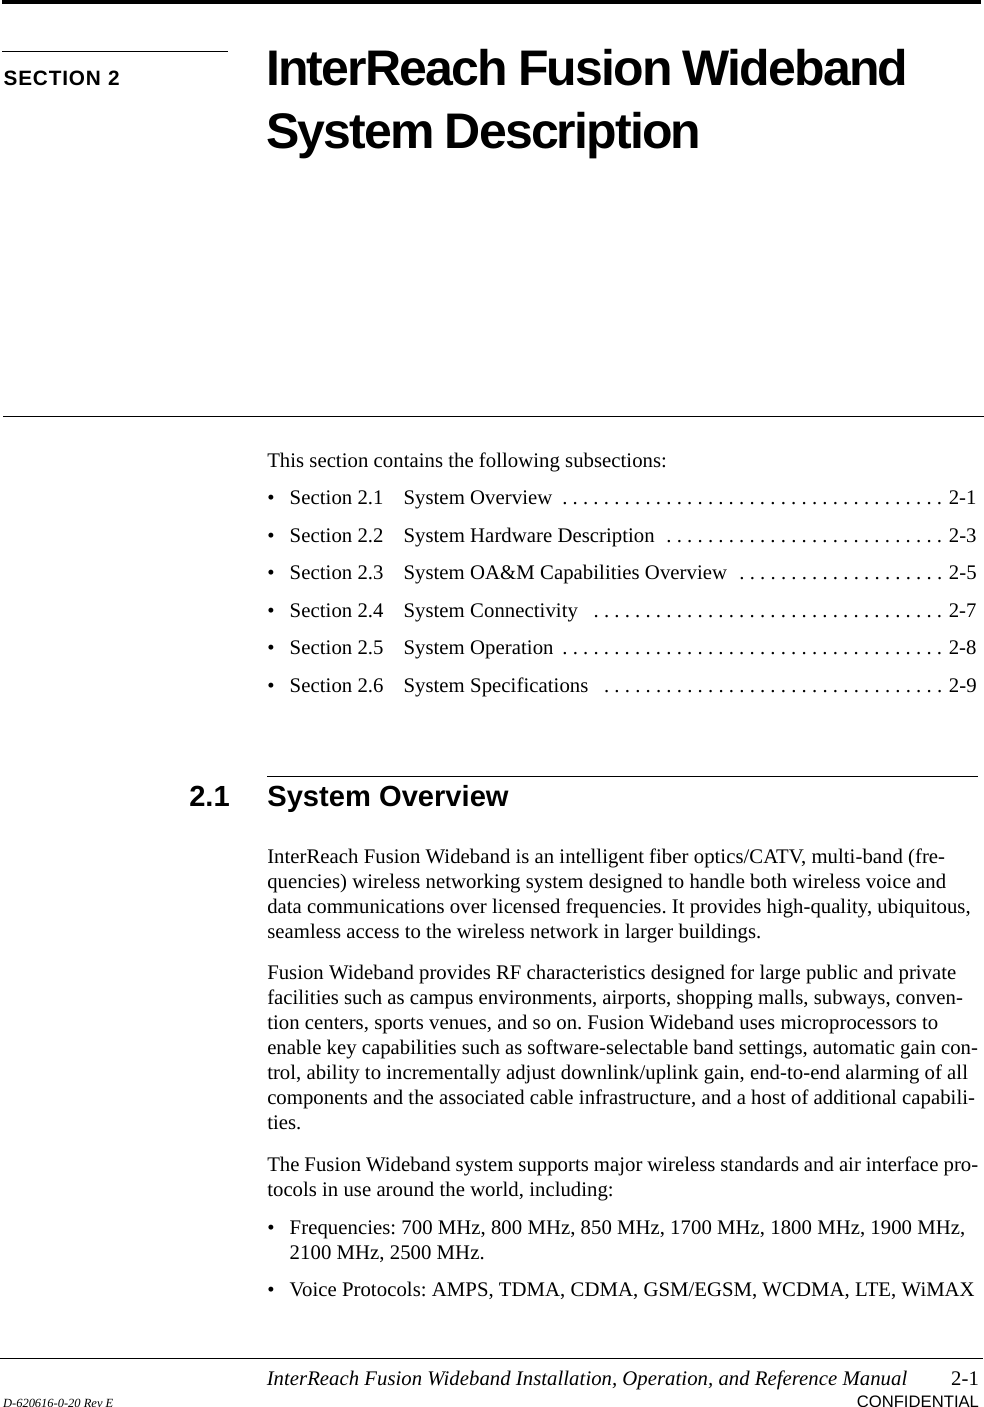 InterReach Fusion Wideband Installation, Operation, and Reference Manual 2-1D-620616-0-20 Rev E CONFIDENTIALSECTION 2 InterReach Fusion Wideband System DescriptionThis section contains the following subsections:• Section 2.1   System Overview  . . . . . . . . . . . . . . . . . . . . . . . . . . . . . . . . . . . . . 2-1• Section 2.2   System Hardware Description  . . . . . . . . . . . . . . . . . . . . . . . . . . . 2-3• Section 2.3   System OA&amp;M Capabilities Overview  . . . . . . . . . . . . . . . . . . . . 2-5• Section 2.4   System Connectivity   . . . . . . . . . . . . . . . . . . . . . . . . . . . . . . . . . . 2-7• Section 2.5   System Operation  . . . . . . . . . . . . . . . . . . . . . . . . . . . . . . . . . . . . . 2-8• Section 2.6   System Specifications   . . . . . . . . . . . . . . . . . . . . . . . . . . . . . . . . . 2-92.1 System OverviewInterReach Fusion Wideband is an intelligent fiber optics/CATV, multi-band (fre-quencies) wireless networking system designed to handle both wireless voice and data communications over licensed frequencies. It provides high-quality, ubiquitous, seamless access to the wireless network in larger buildings.Fusion Wideband provides RF characteristics designed for large public and private facilities such as campus environments, airports, shopping malls, subways, conven-tion centers, sports venues, and so on. Fusion Wideband uses microprocessors to enable key capabilities such as software-selectable band settings, automatic gain con-trol, ability to incrementally adjust downlink/uplink gain, end-to-end alarming of all components and the associated cable infrastructure, and a host of additional capabili-ties.The Fusion Wideband system supports major wireless standards and air interface pro-tocols in use around the world, including:• Frequencies: 700 MHz, 800 MHz, 850 MHz, 1700 MHz, 1800 MHz, 1900 MHz, 2100 MHz, 2500 MHz.• Voice Protocols: AMPS, TDMA, CDMA, GSM/EGSM, WCDMA, LTE, WiMAX